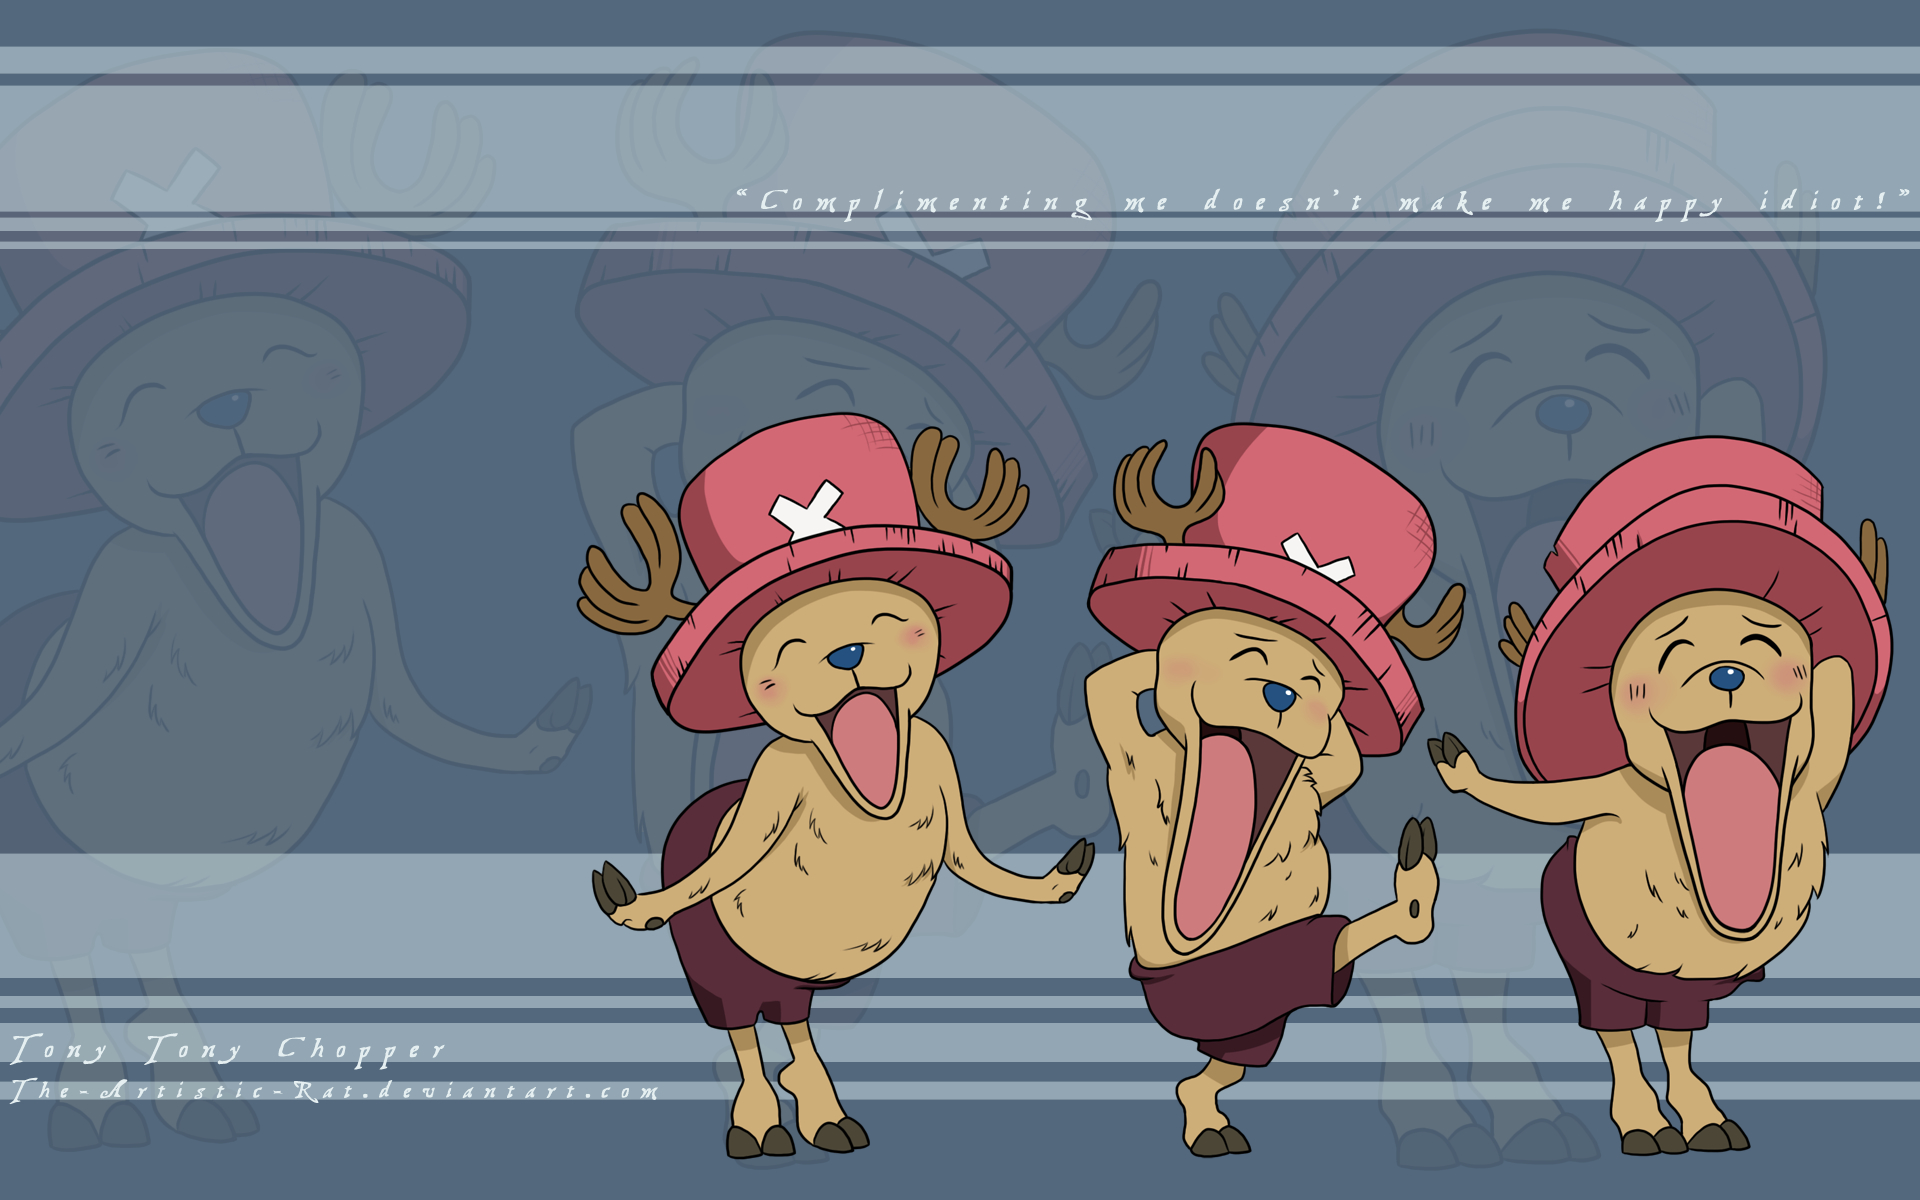 1920x1200 Tony Tony Chopper High Definition Wallpaper For Your PC Desktop | One piece wallpaper iphone, Chopper, One piece anime